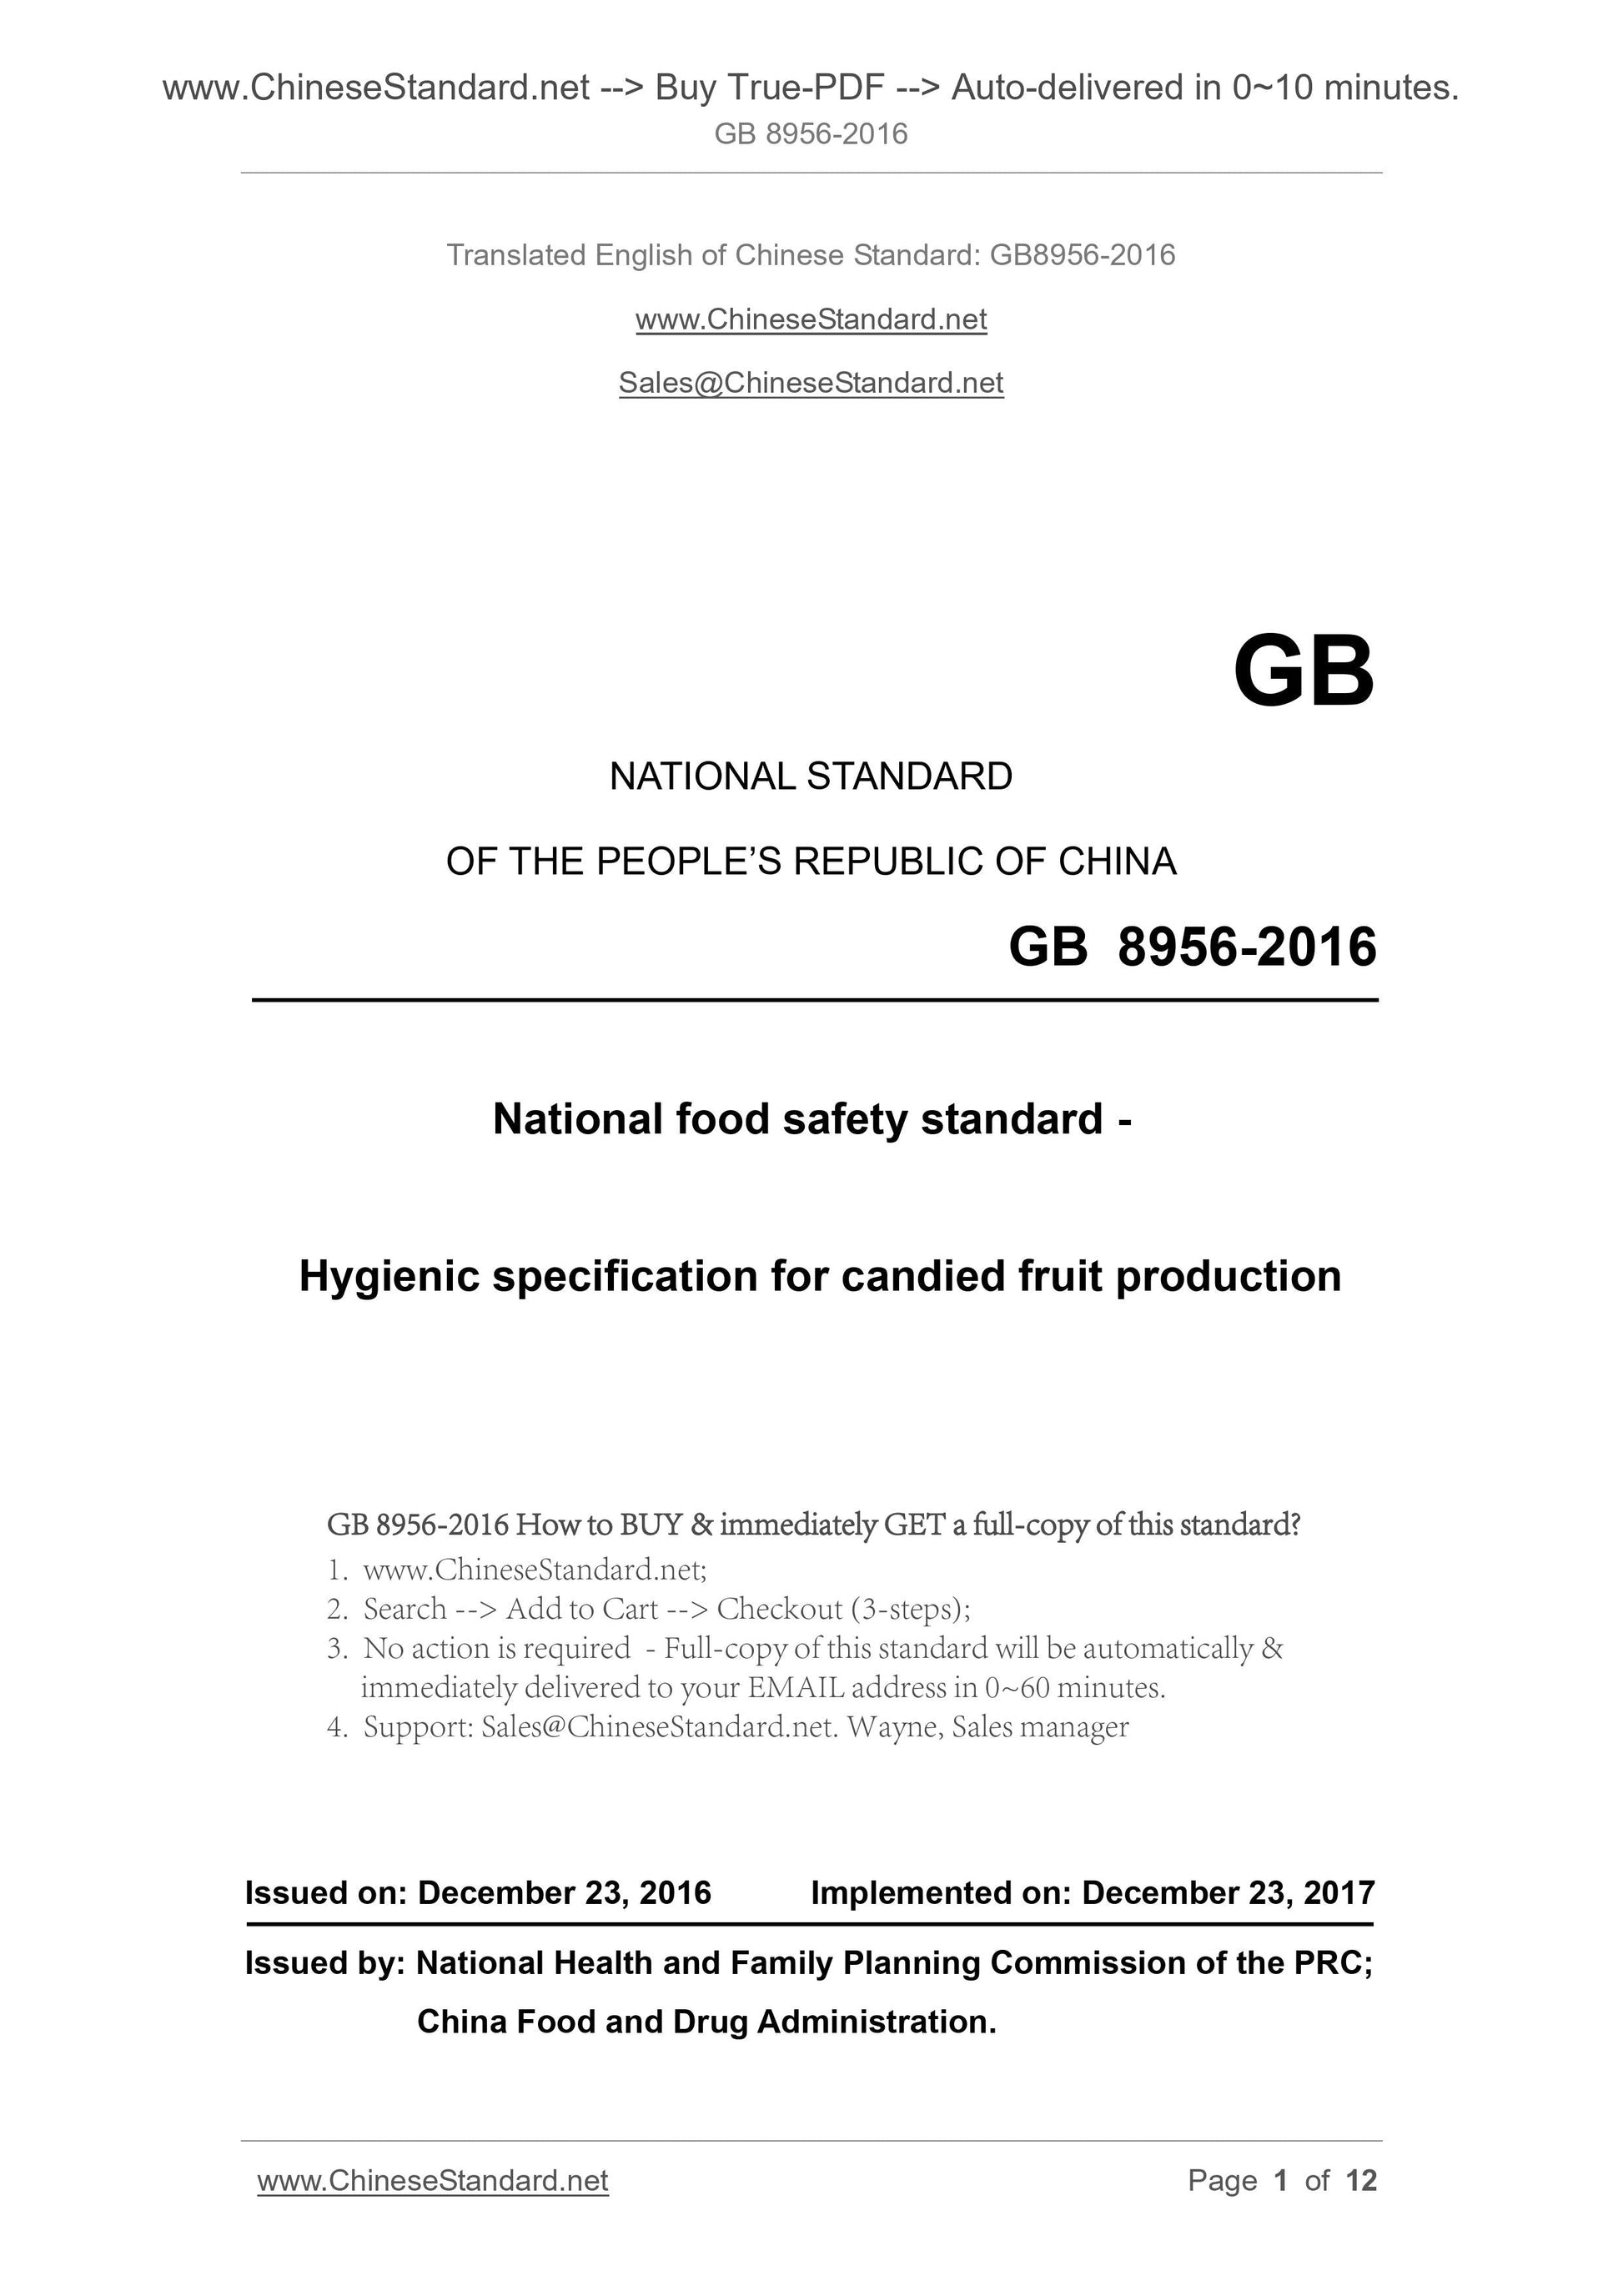 GB 8956-2016 Page 1